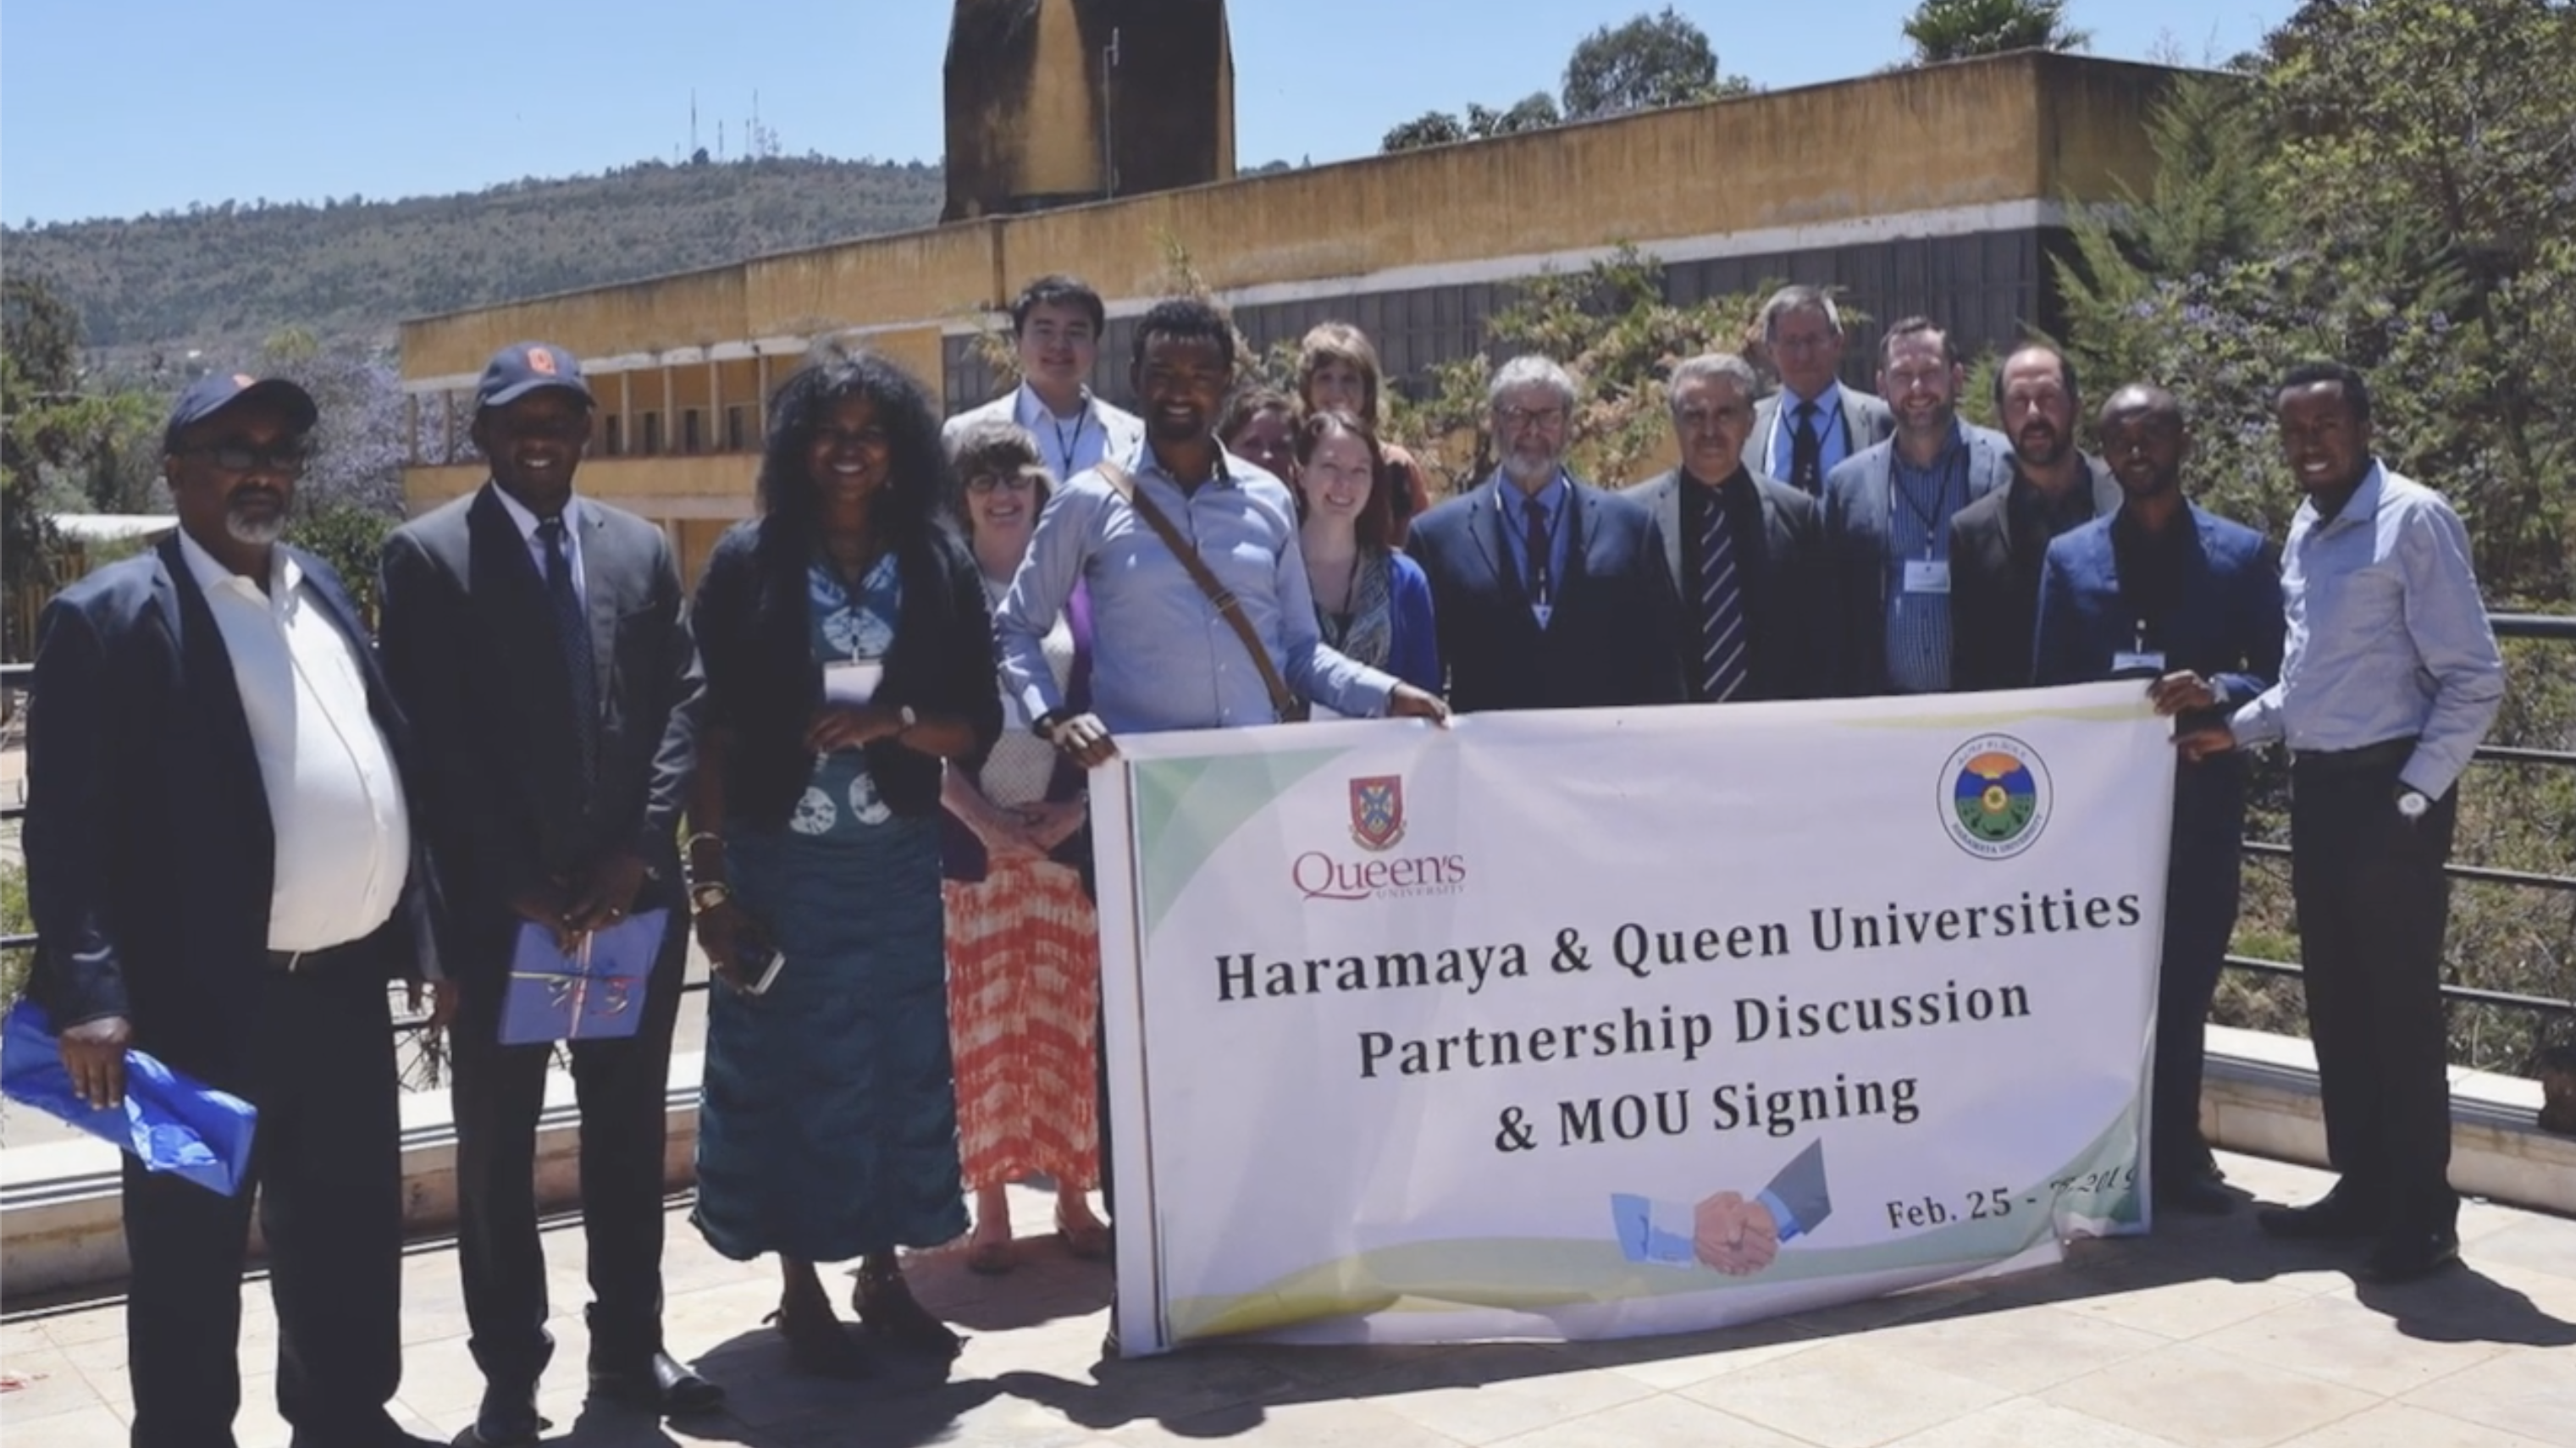 The Queen's and Haramaya University Partnership to Develop Post-Graduate Training Programs